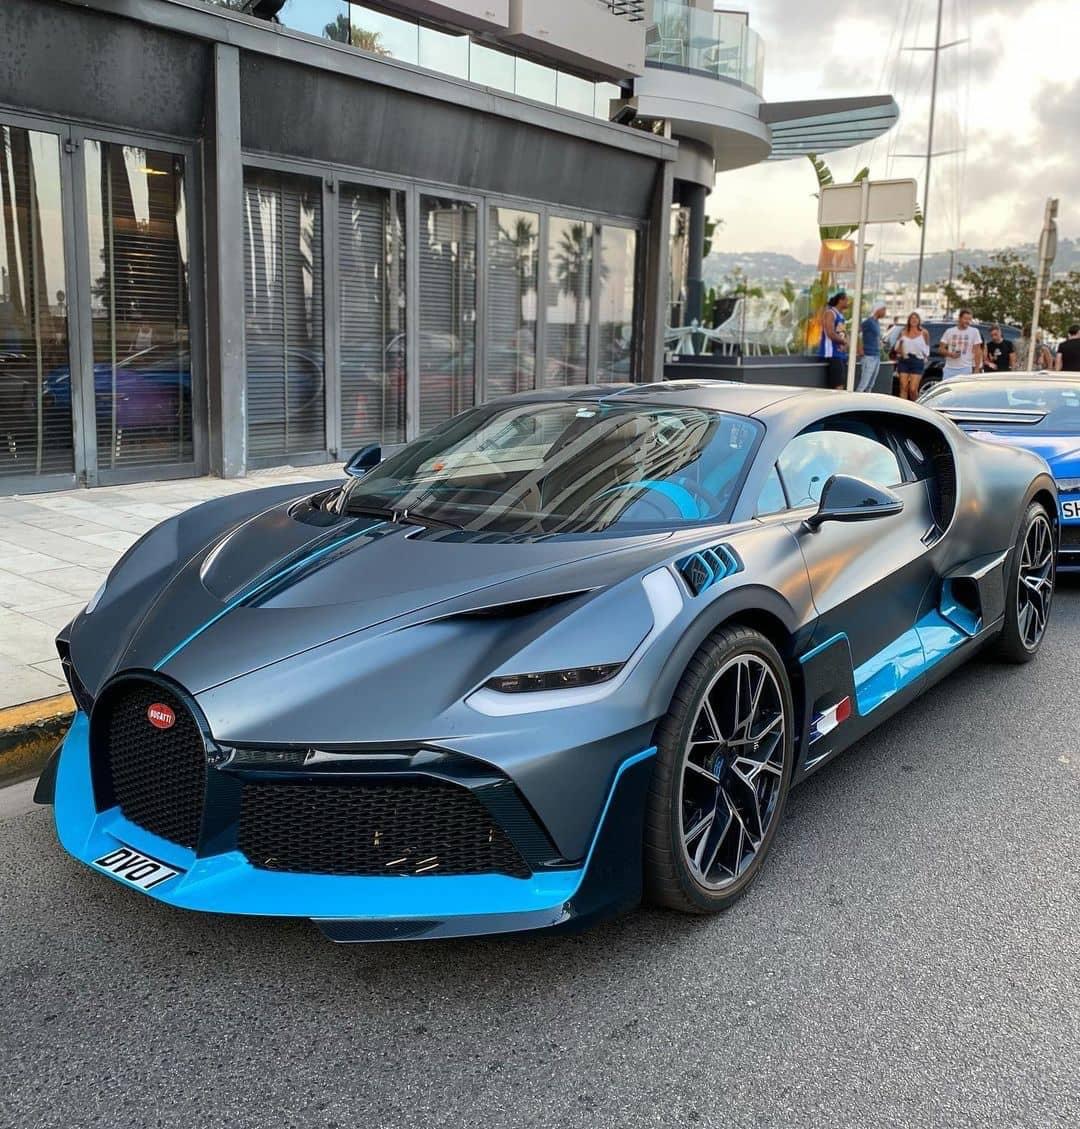 Bugatti Divo
➡️ Follow @expensivecarsdaily
➡️ Follow @expensivecarsdaily
🔔 Turn on post notifications
Credit: @florian_photographyy 📸
#supercarsdaily #supercarage #supercarclub #supercarlife #expensivecars #supercarkiller #hypercars #supercar #luxurycars #supercarlifestyle